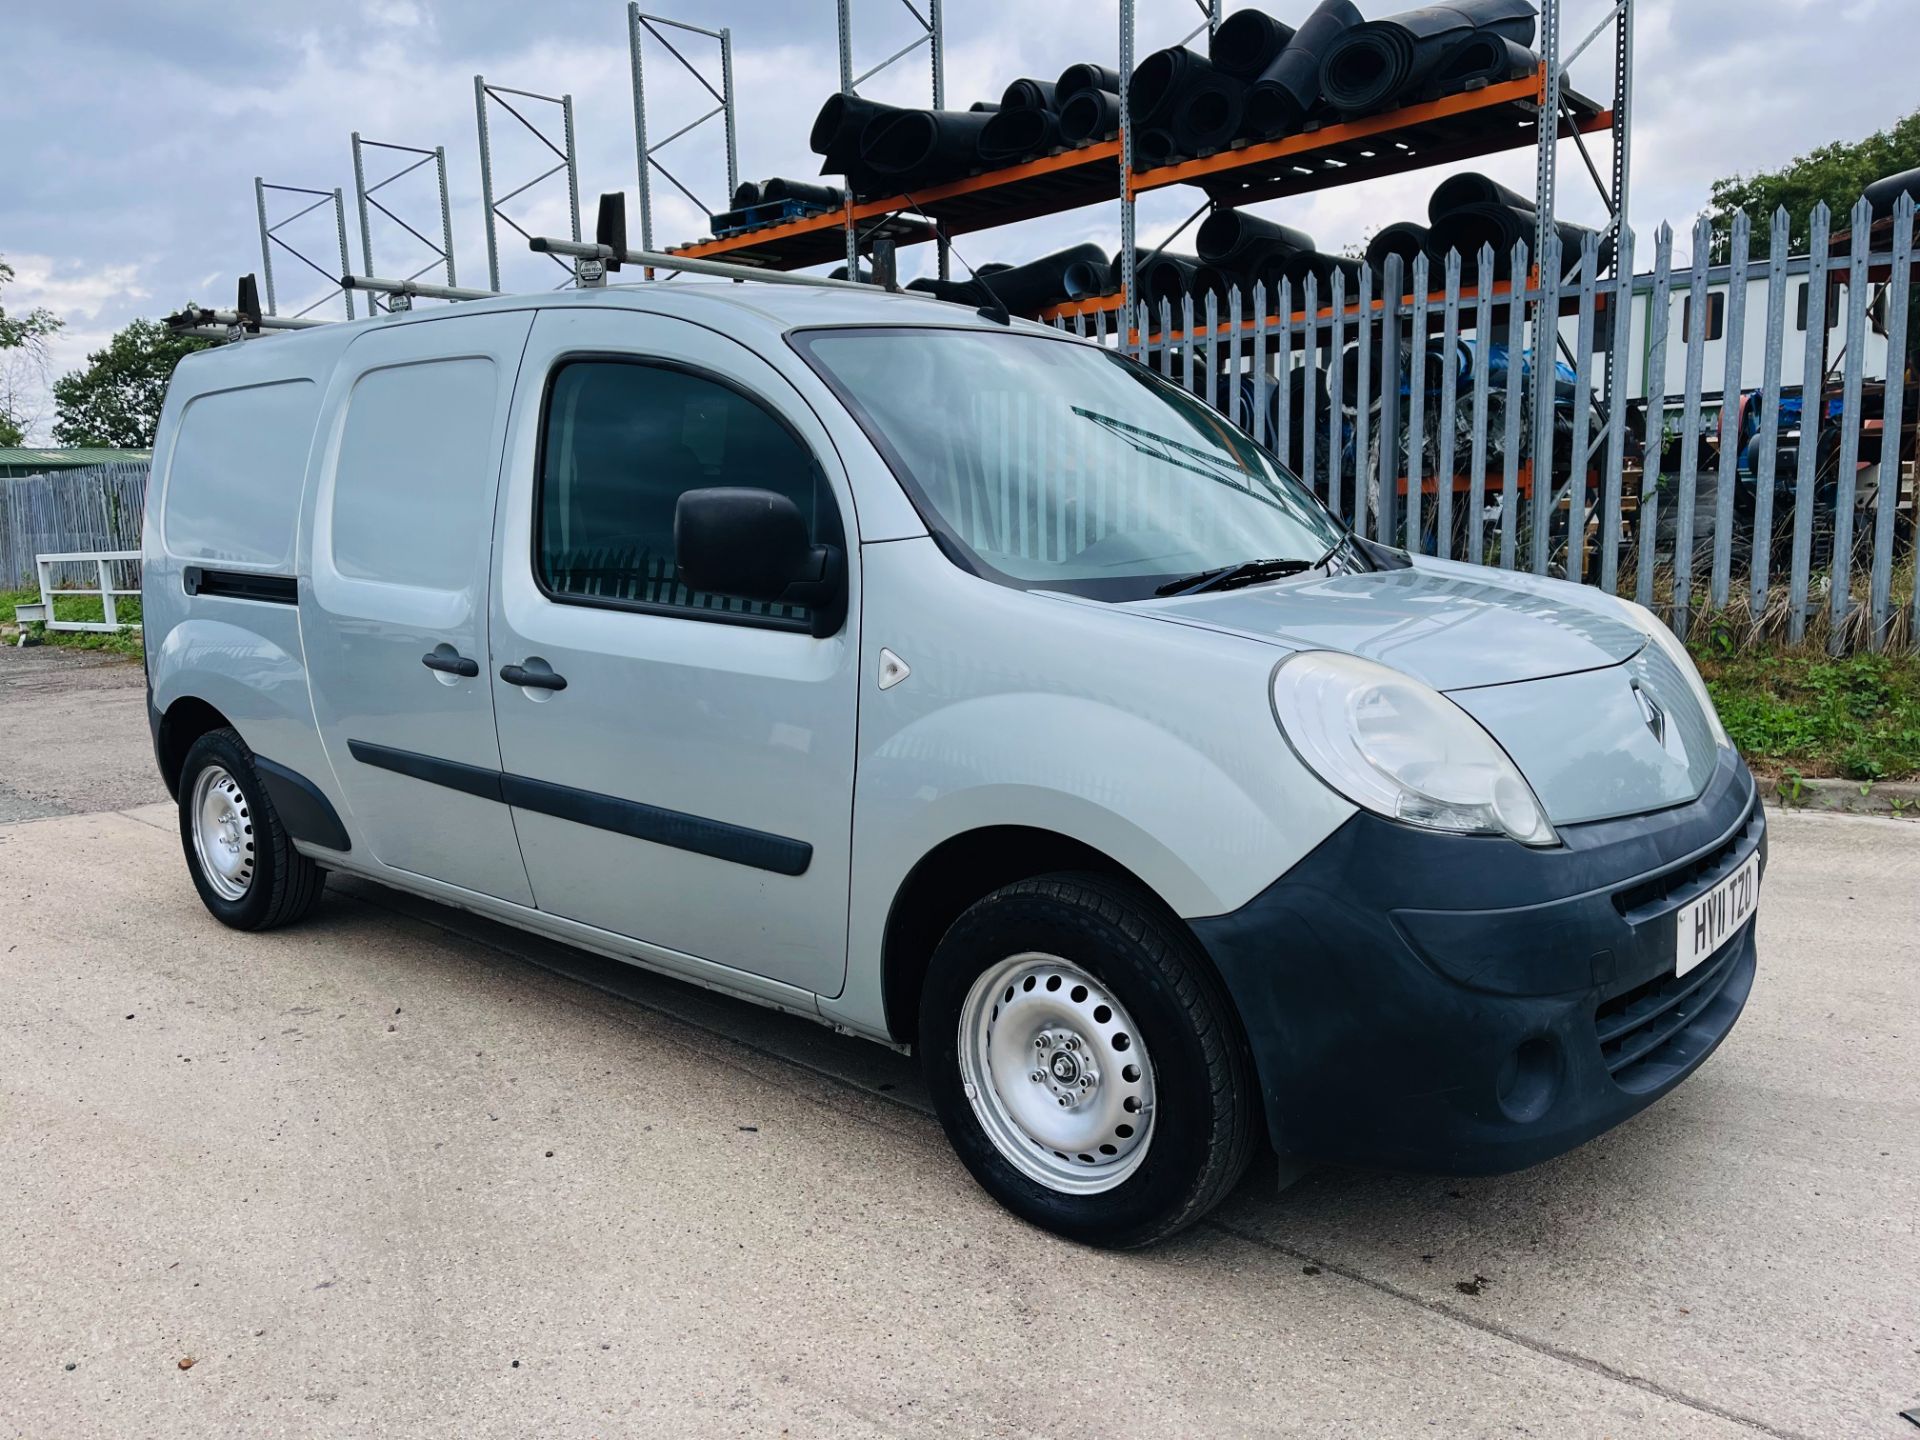 (Reserve Met) Renault Kangoo dci "Maxi Plus" 11reg - Rare and hard to find a Maxi Plus model -No Vat - Image 3 of 18